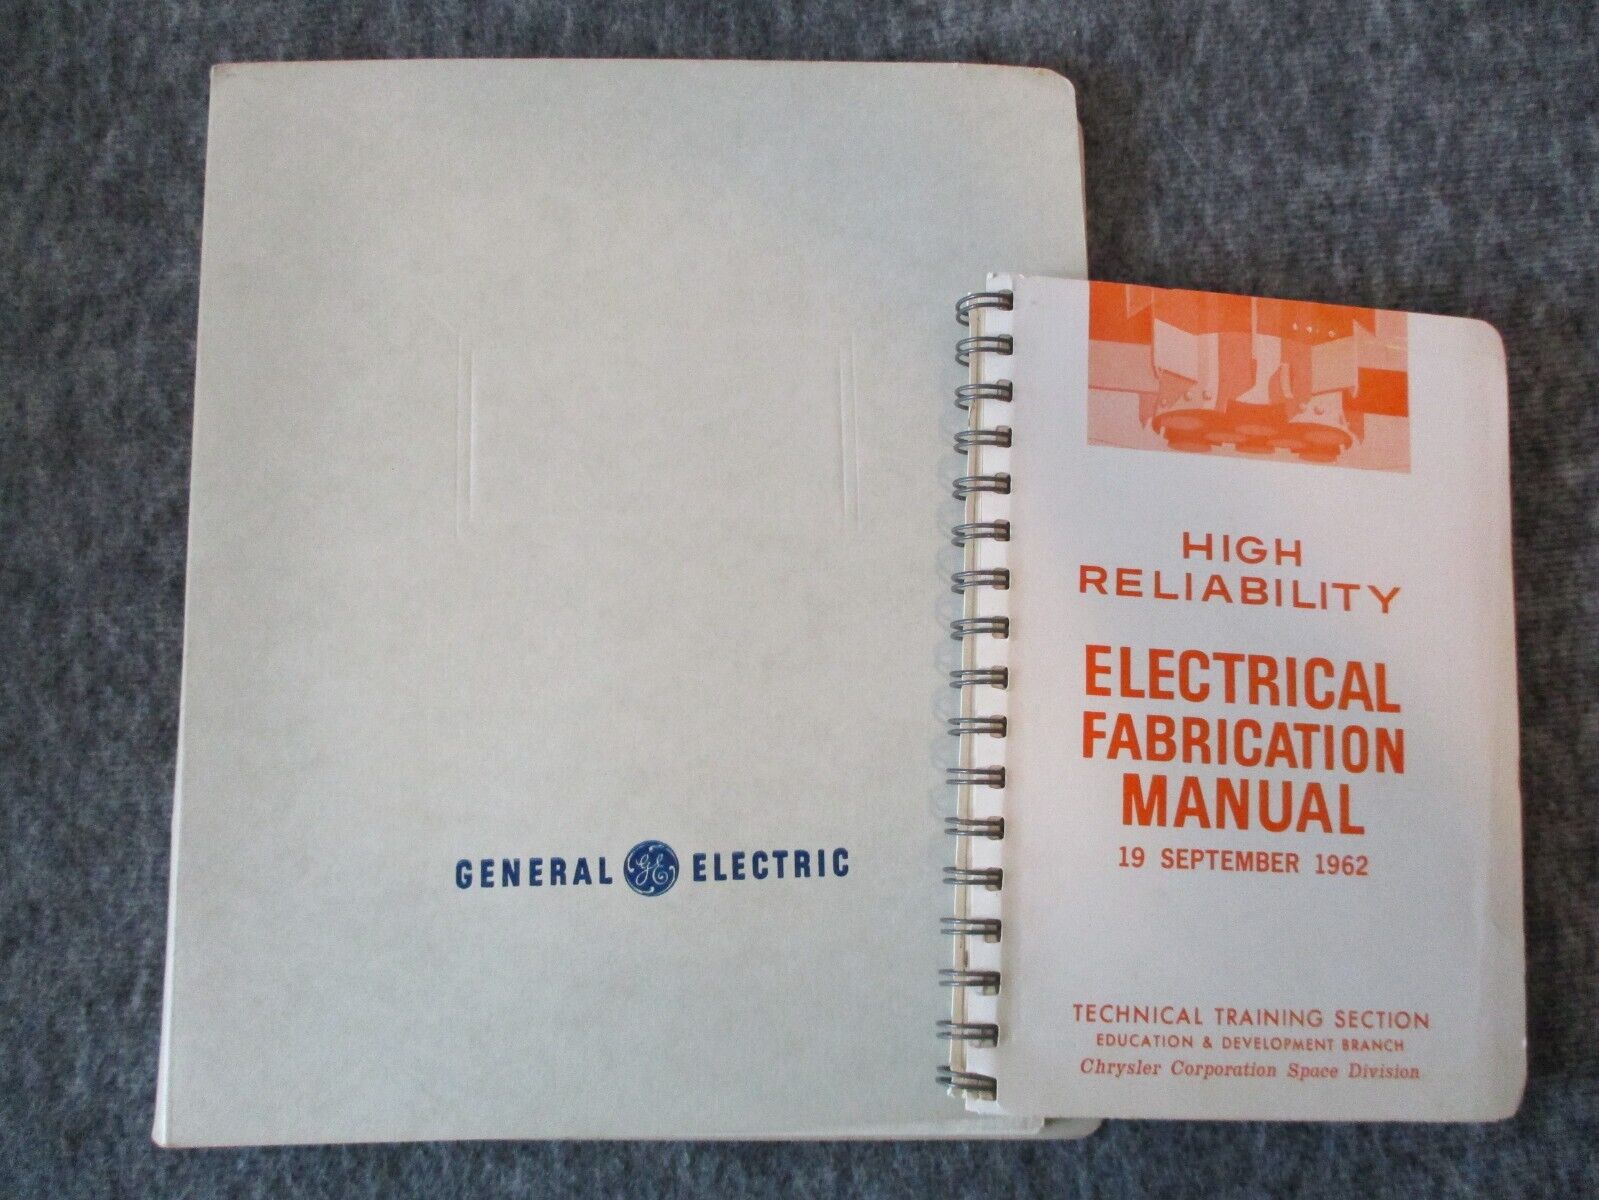 NASA MSFC APOLLO SATURN RELIABILITY CHRYSLER SPACE REQUIREMENTS MANUAL+GE FOLDER